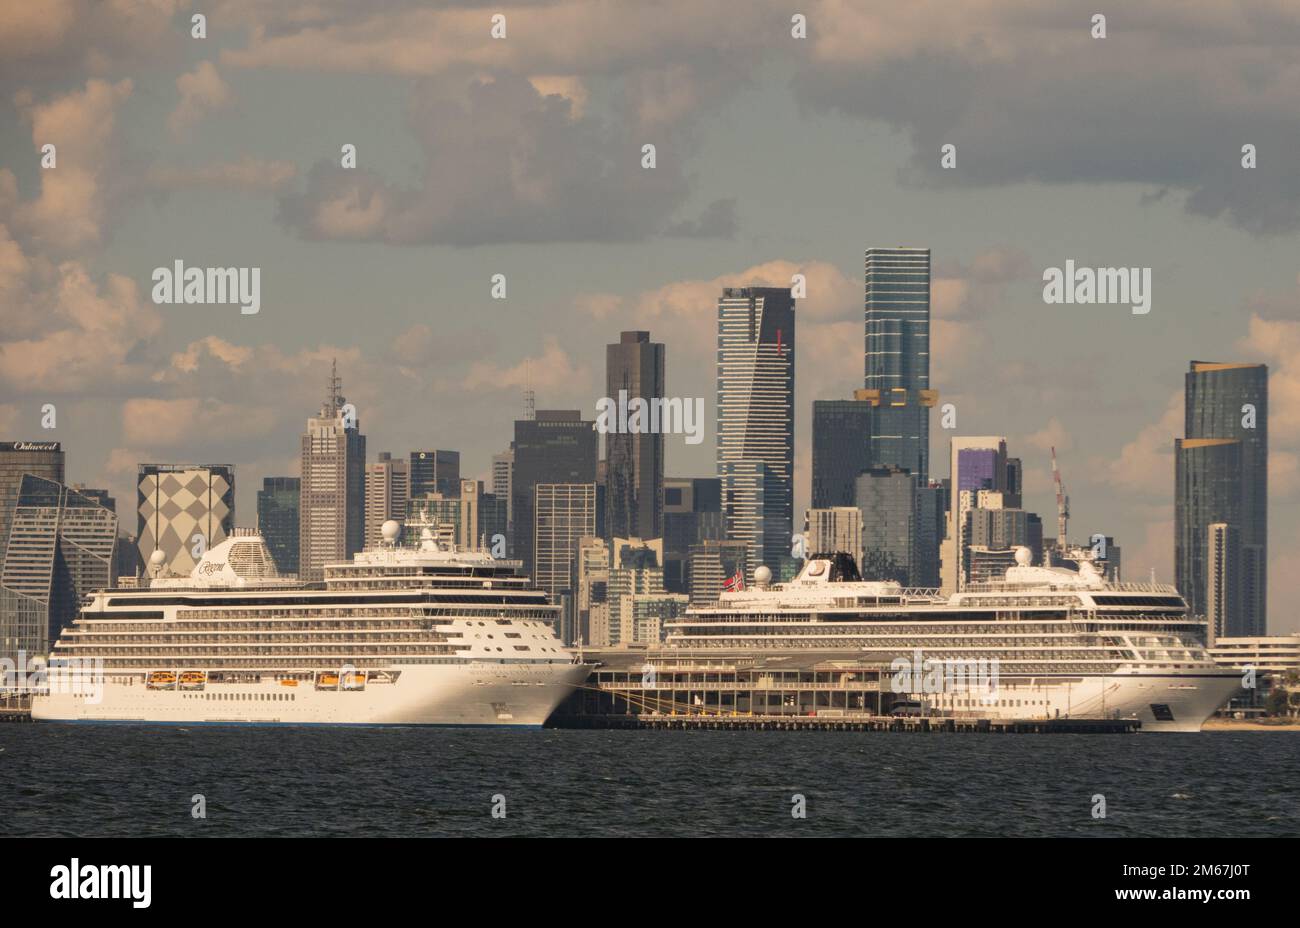 Cruise ships docked at Station Pier in Port Melbourne with the Melbourne city skyline in the background . Stock Photo